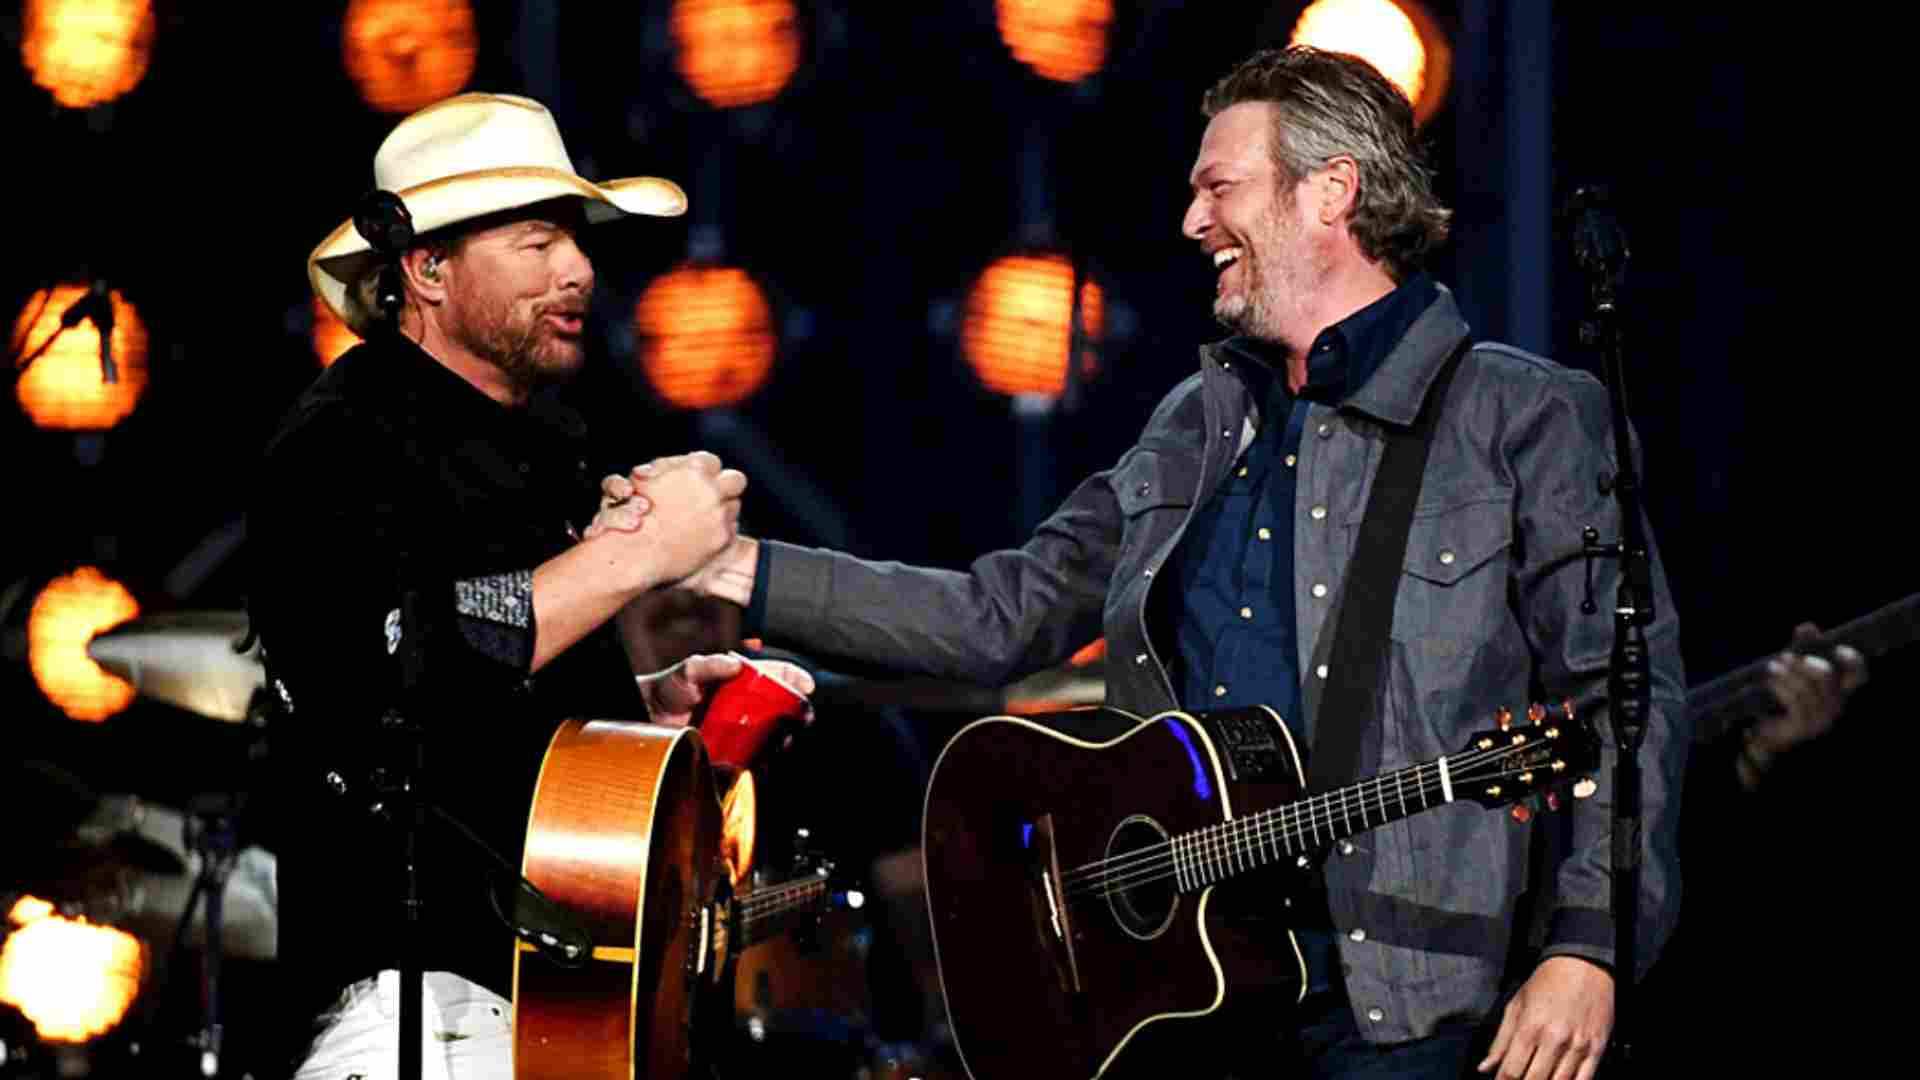 Toby Keith once said that he and Blake Shelton were very much alike in terms of personalities